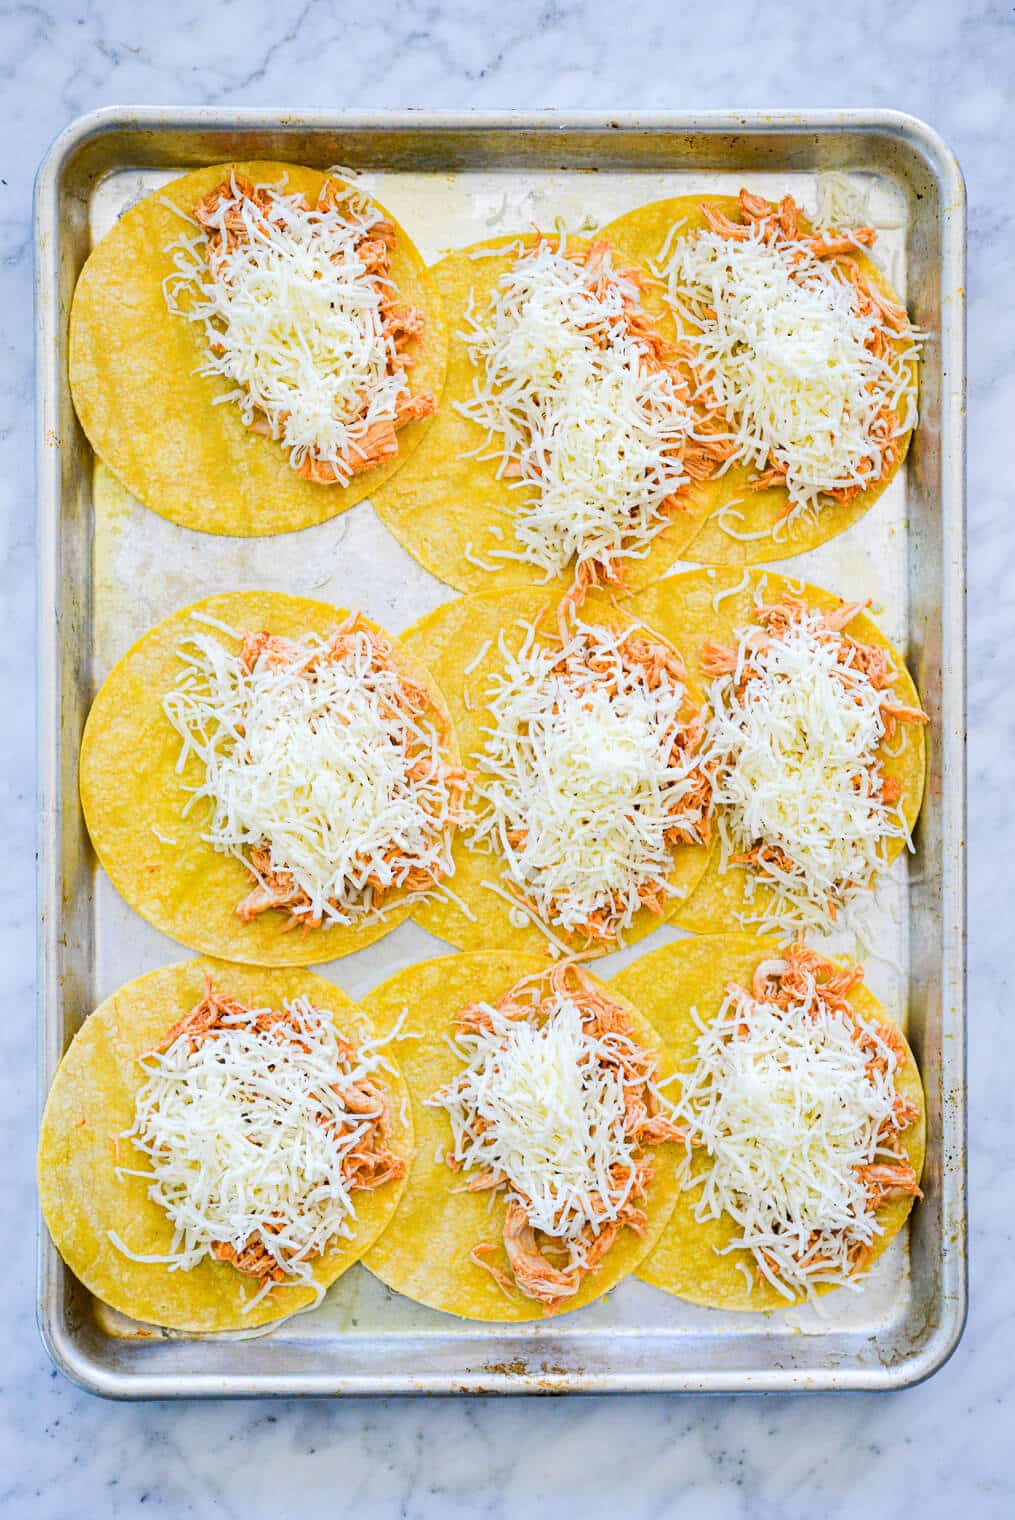 Sheet pan with three rows of three corn tortillas. Each tortilla is topped on one half side with shredded chicken and shredded cheese.